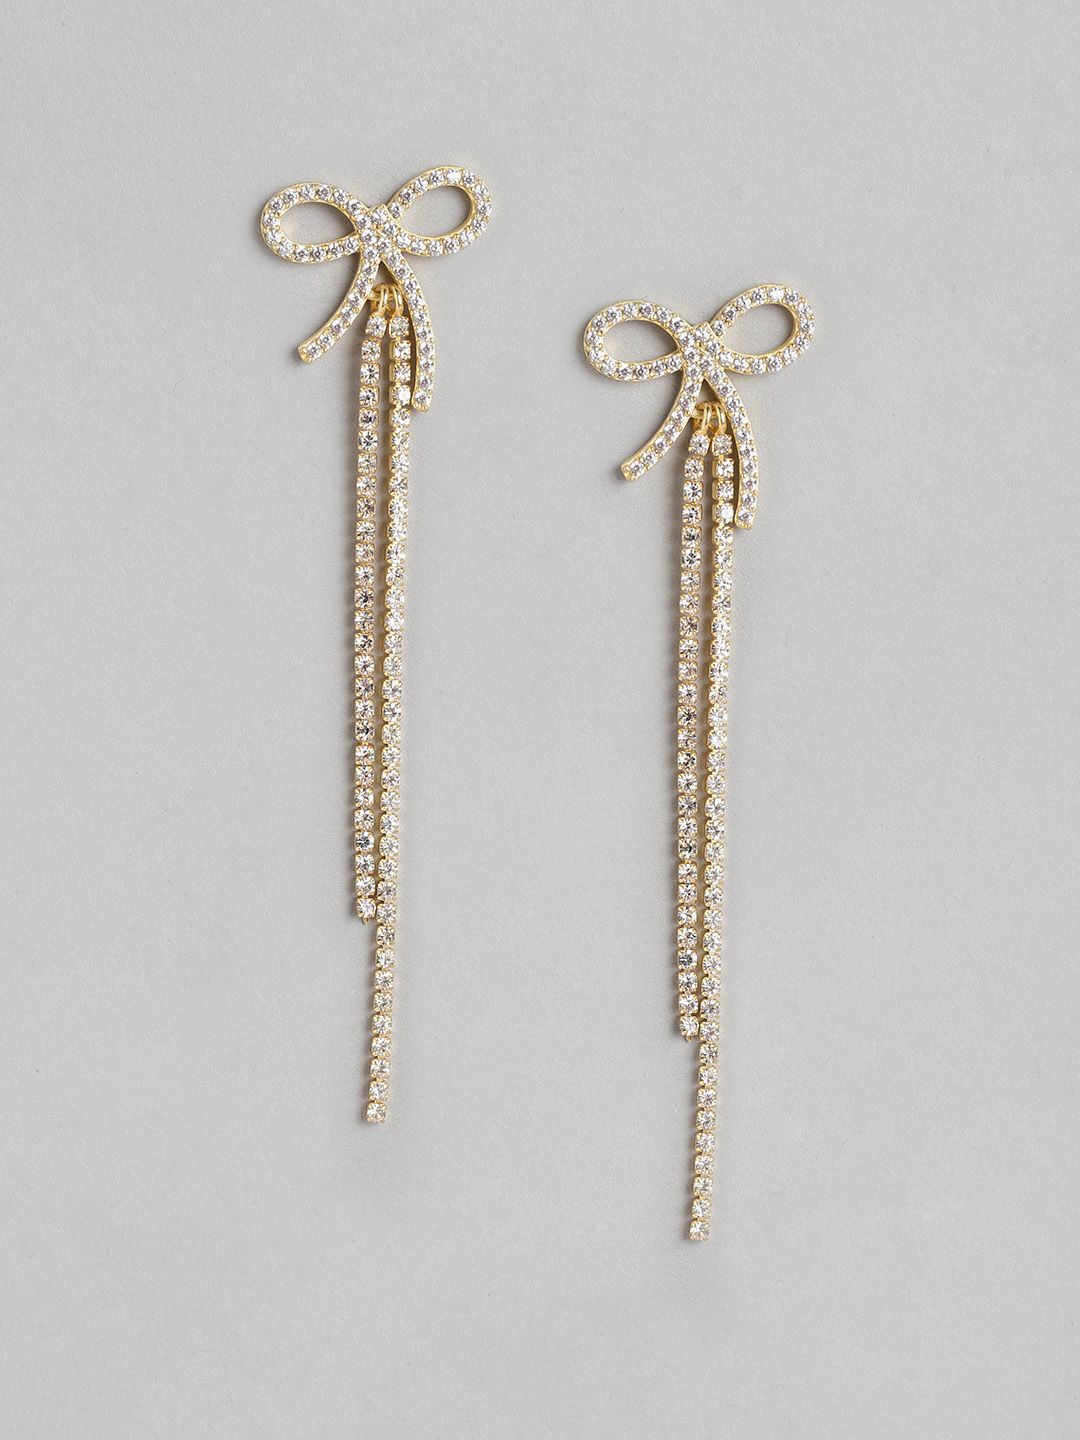 Carlton London Gold-Toned Contemporary Drop Earrings Price in India